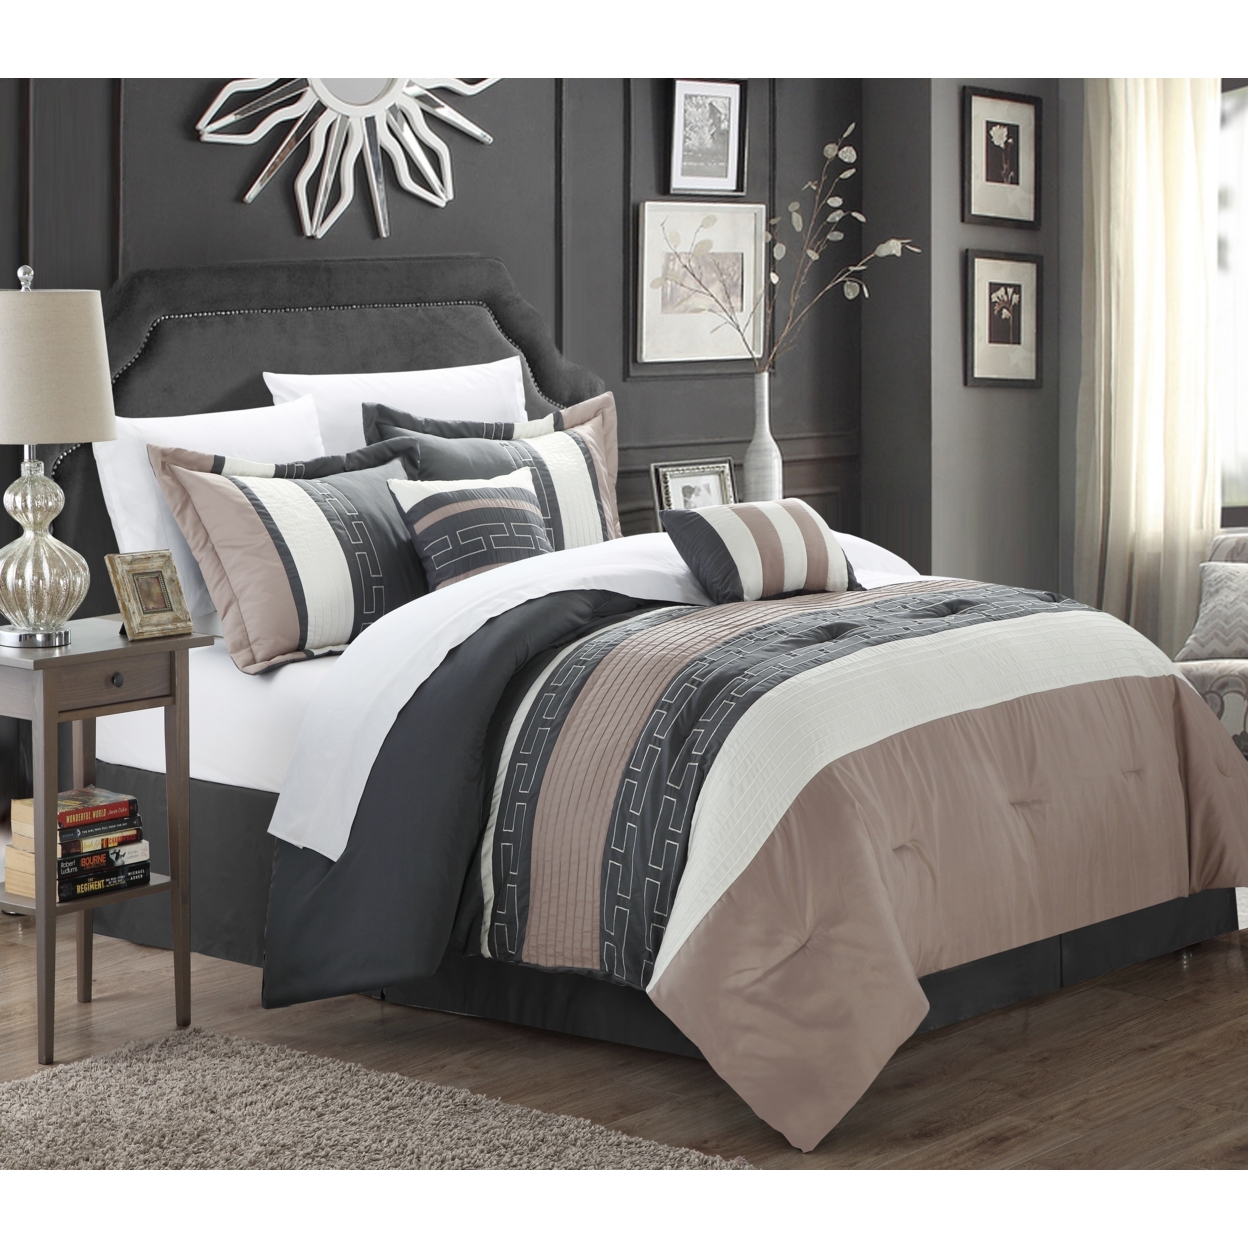 Chic Home Coralie 6-piece Comforter Set Hotel Collection - Taupe, Queen